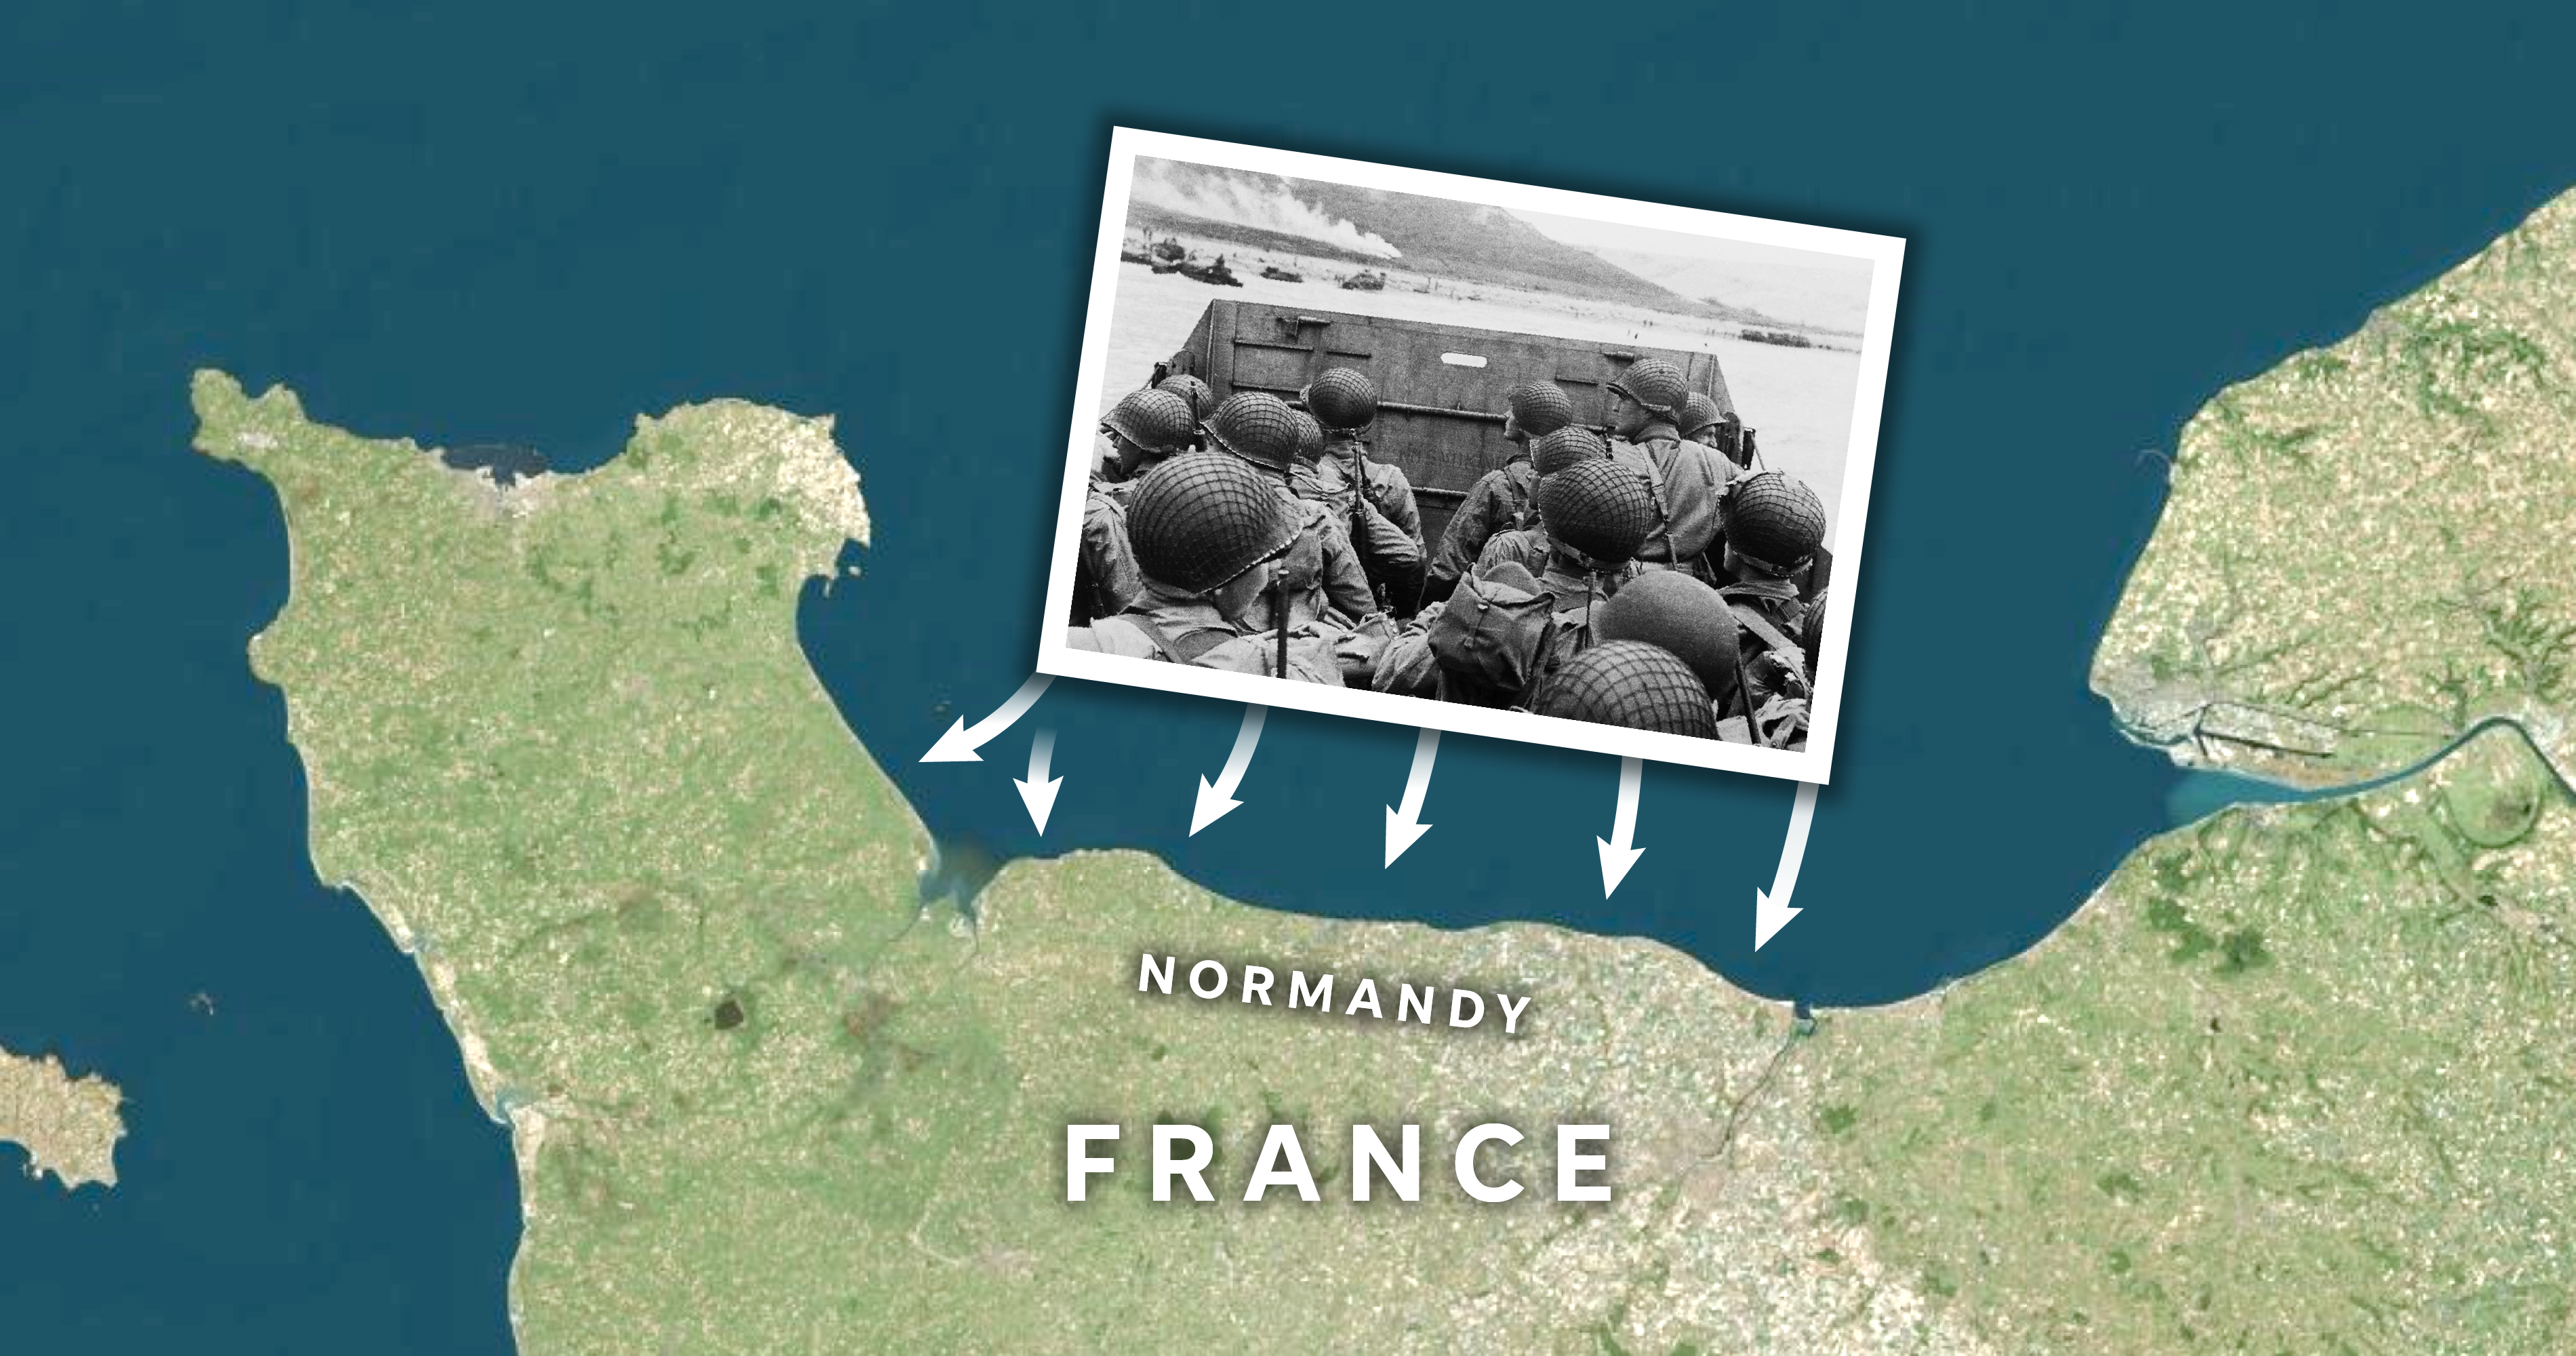 Florida WWII veterans return to Normandy for D-Day 80th anniversary: What to know